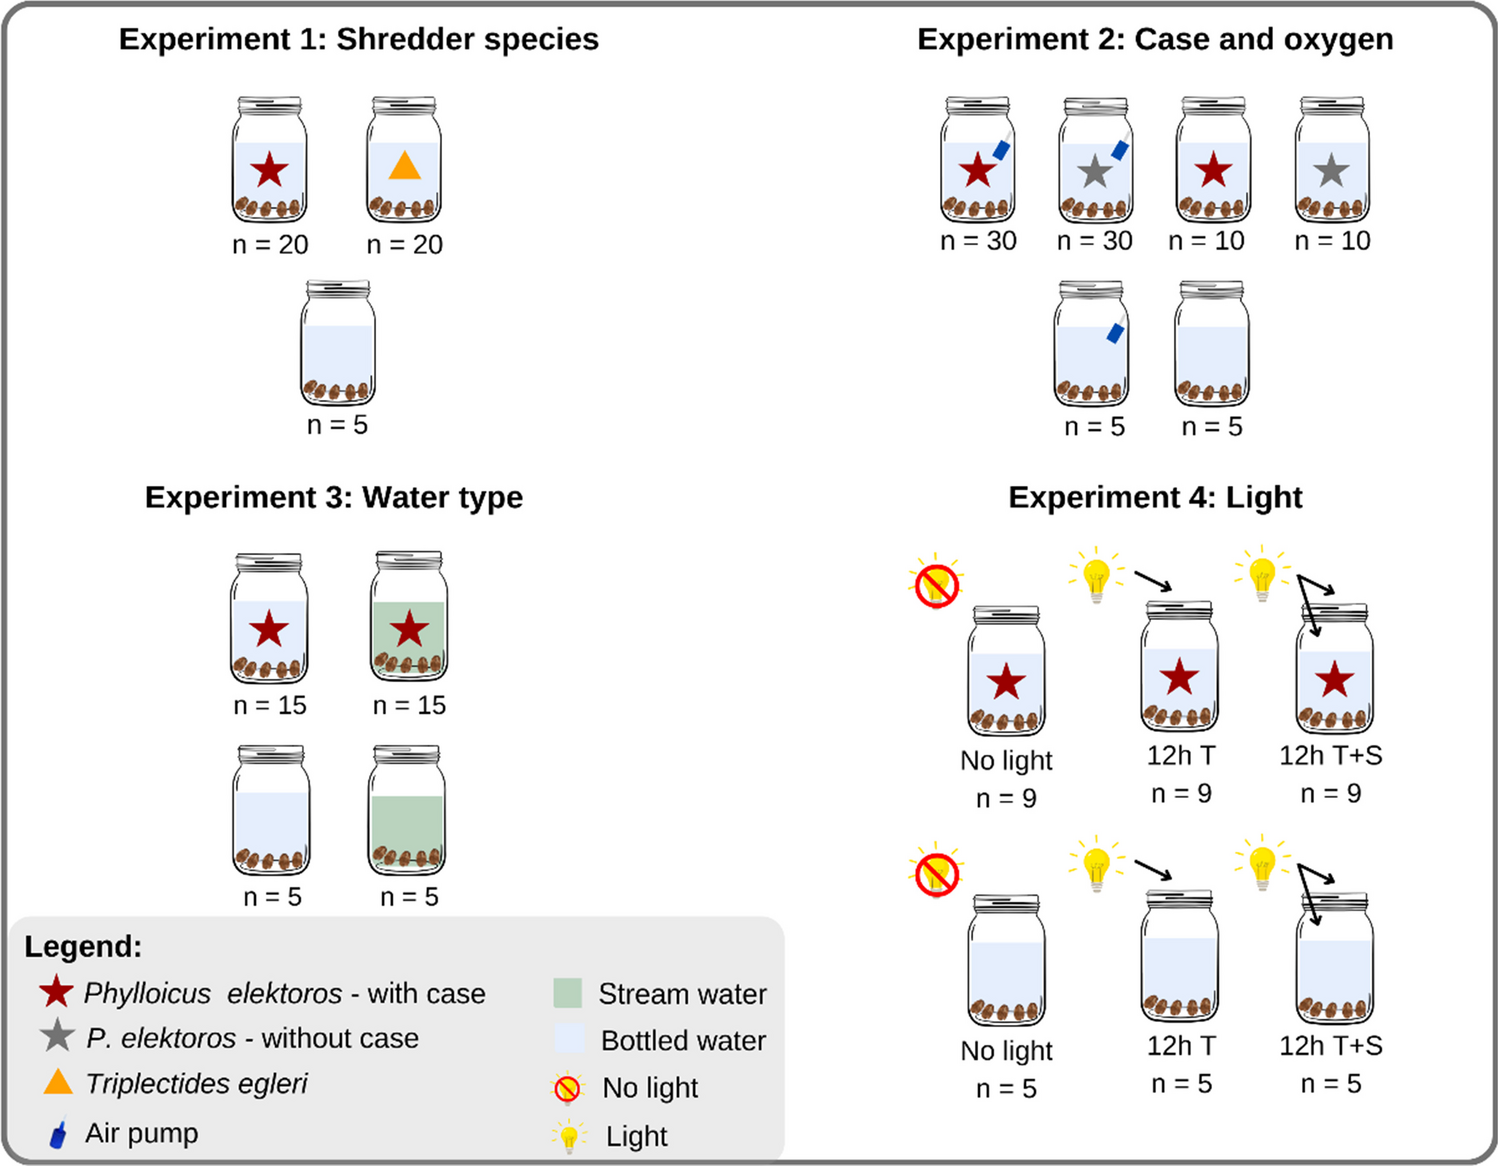 Do Methodological Differences in Experiments with Stream Shredders Imply Variability in Outputs? A Microcosm Approach